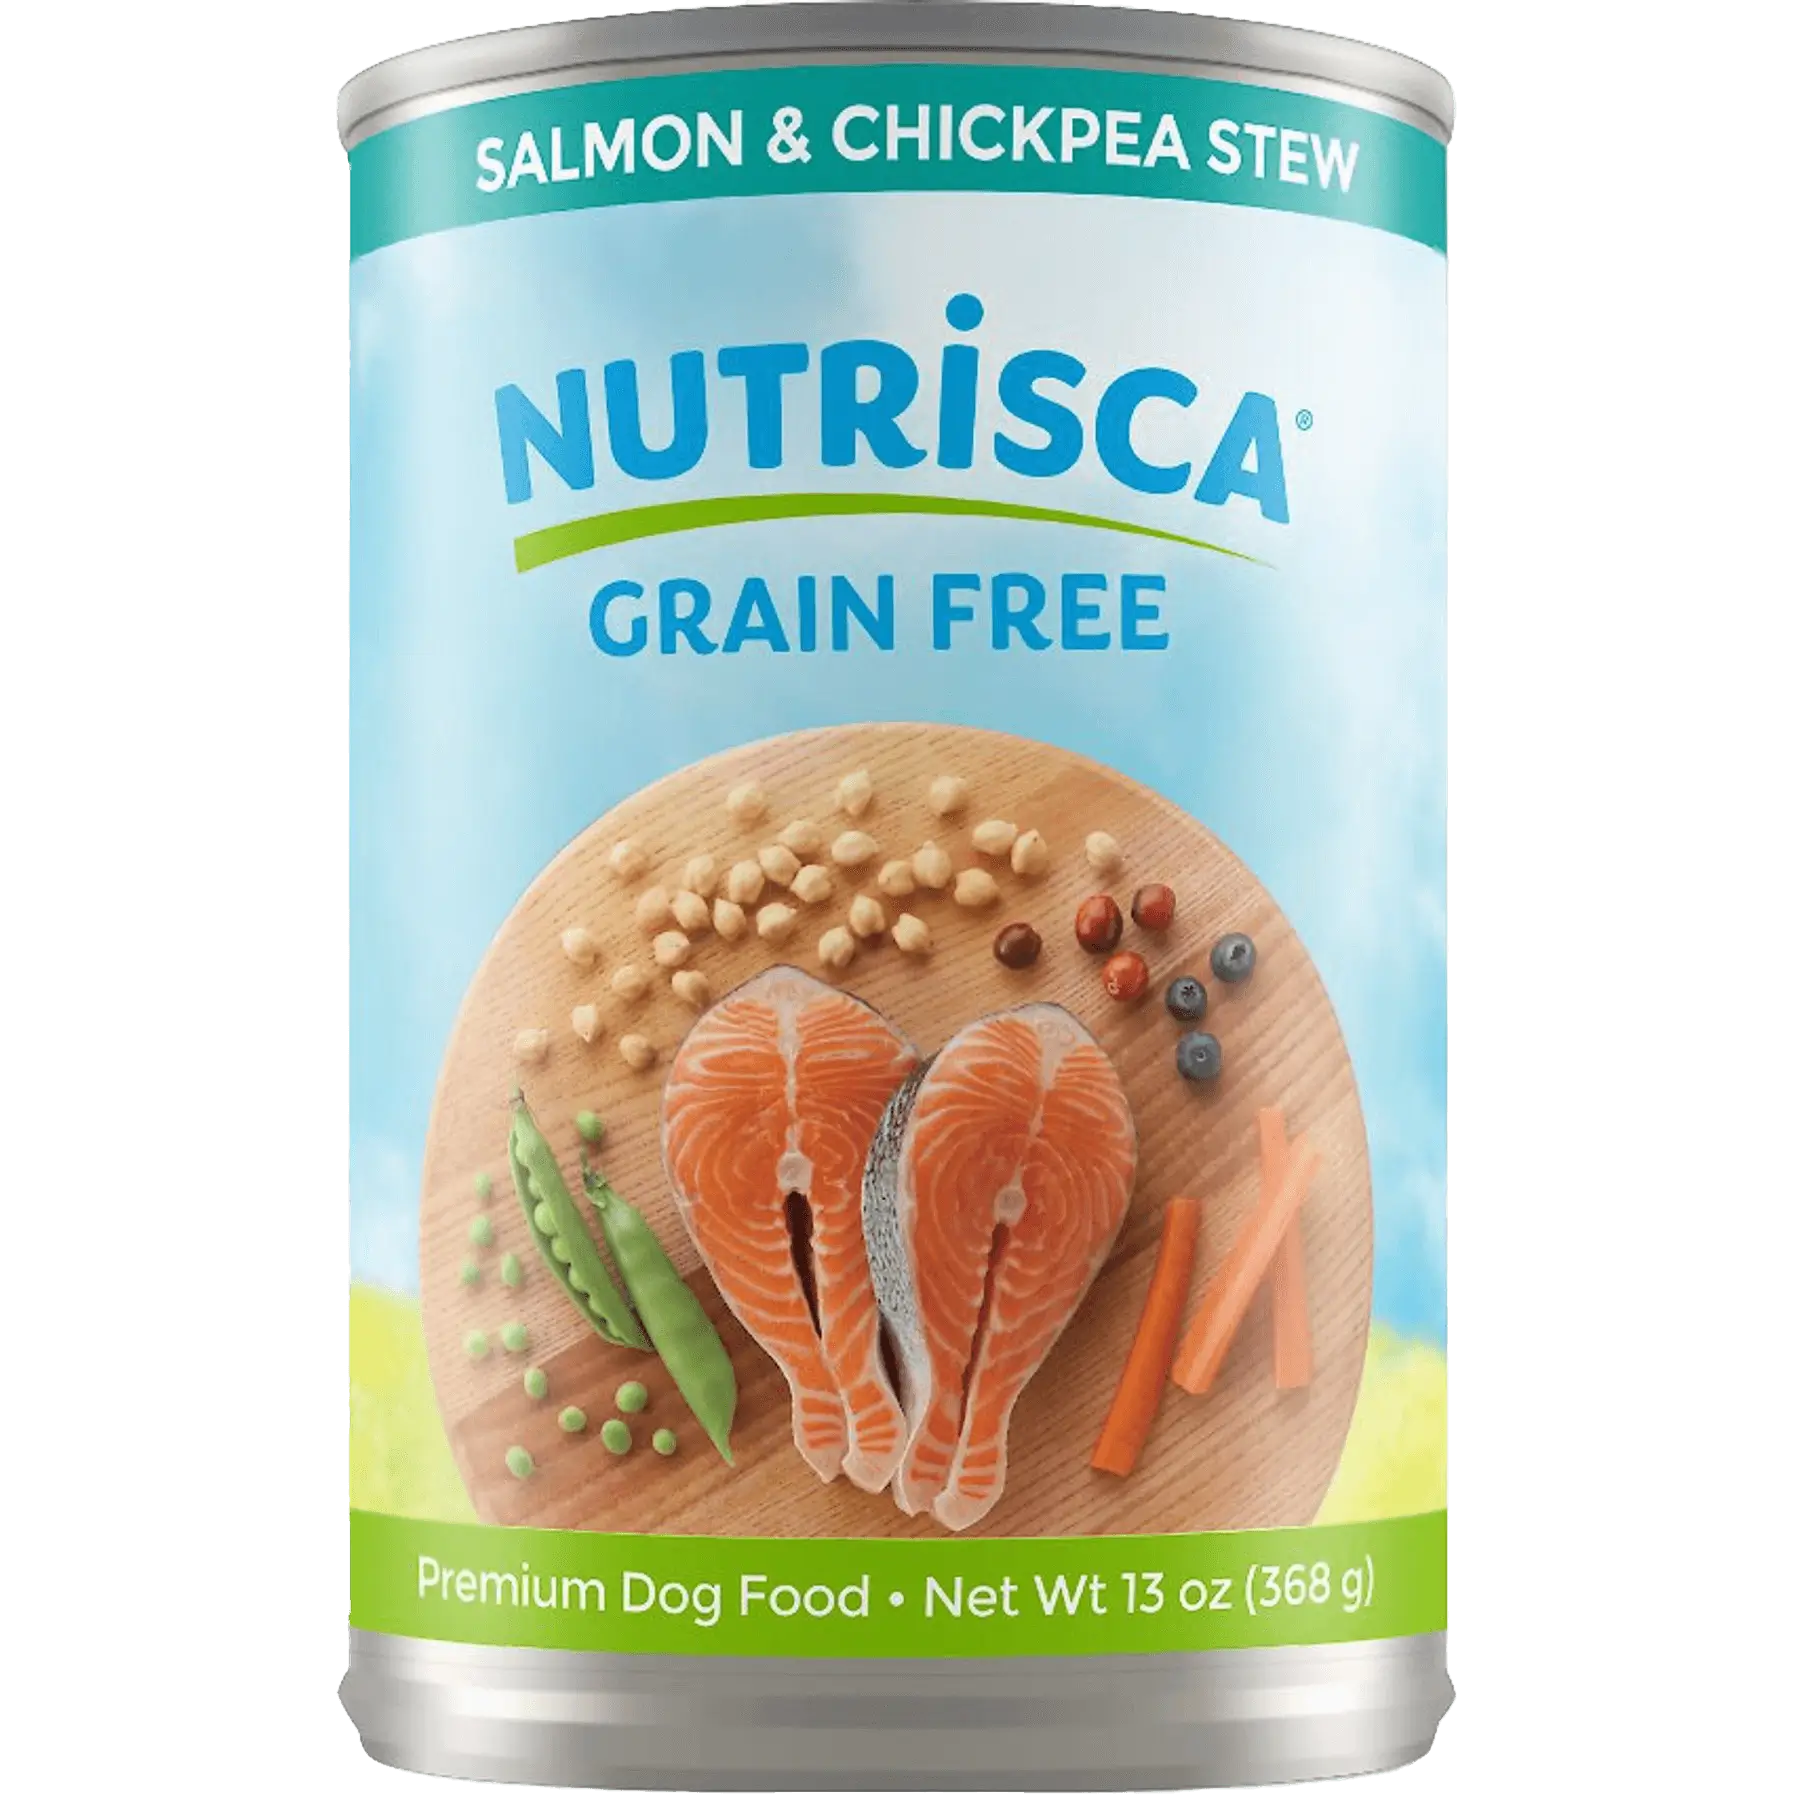 Nutrisca Grain Free Dog Food Review (Canned)